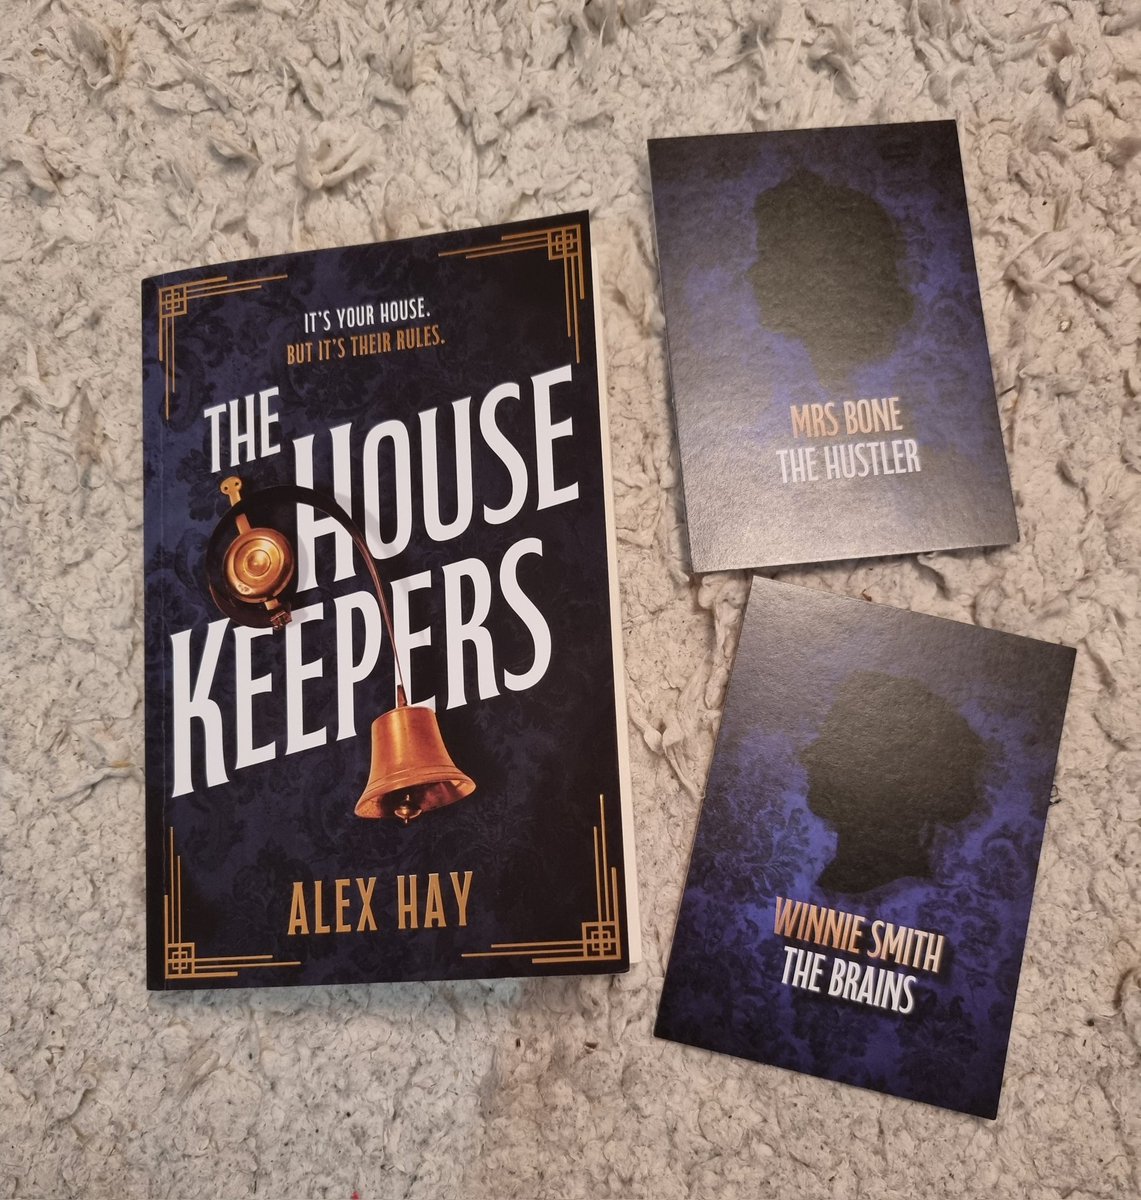 I'm reviewing #TheHouseKeepers by #AlexHay over on Instagram today. 
Thank you @Bookywookydooda for sending this copy to review.
Out Now! 
instagram.com/p/CvJlCnCoTTV/…
#books #BookTwitter #bookbloggers